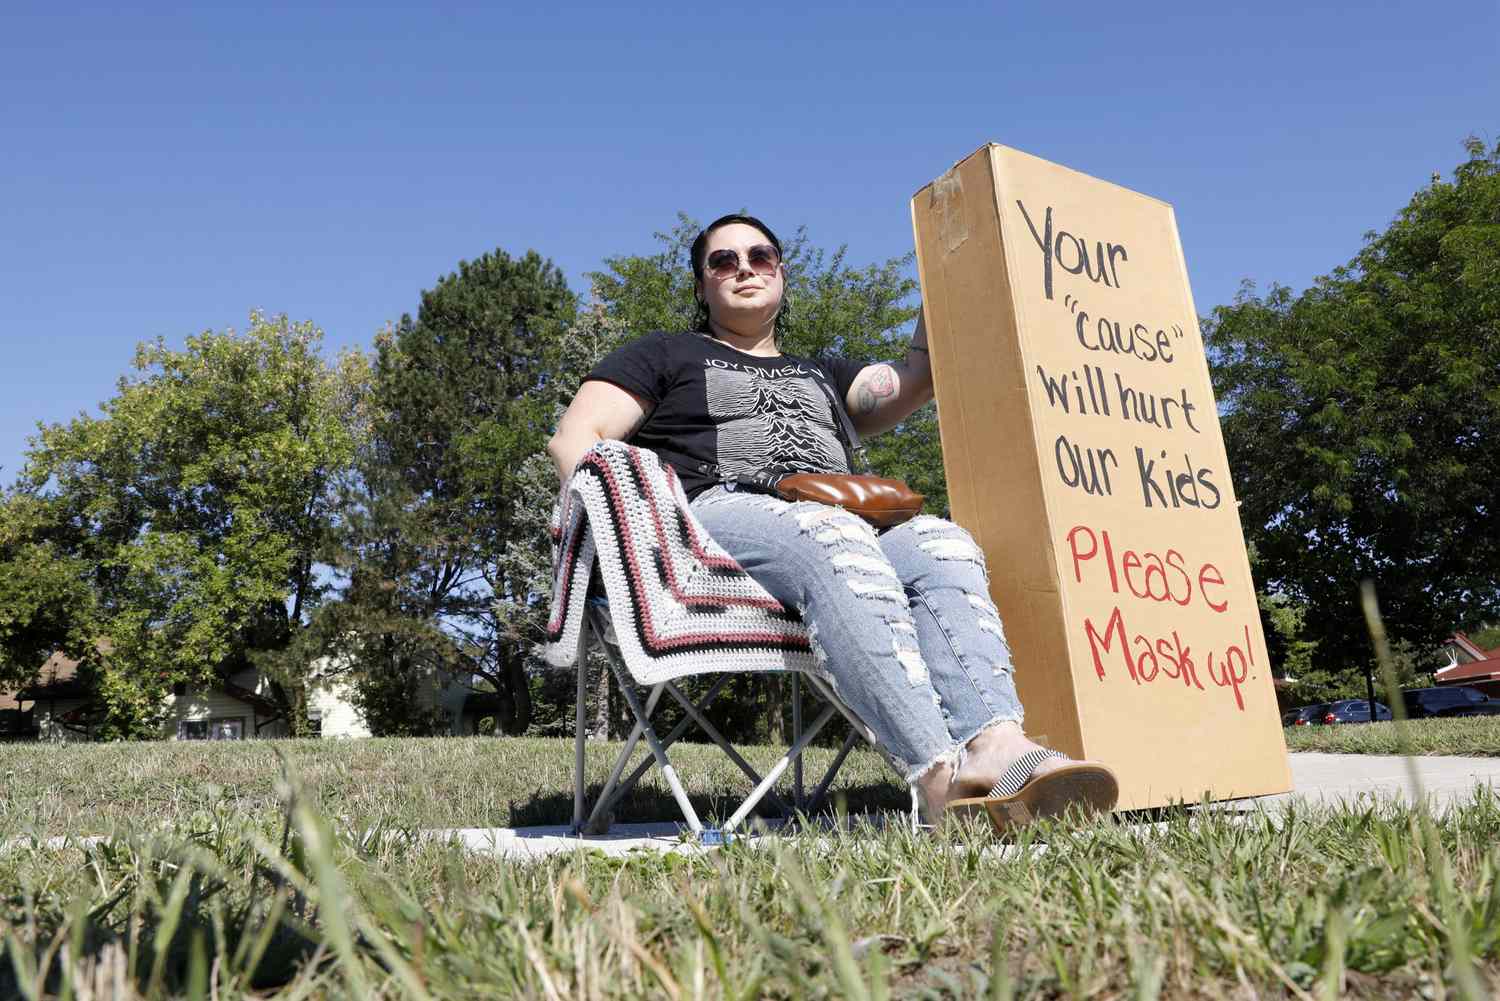 An image of a counter-protester across the street from a rally against the Midland Public Schools (MPS) mask mandates outside the MPS administration building in Midland, Michigan.